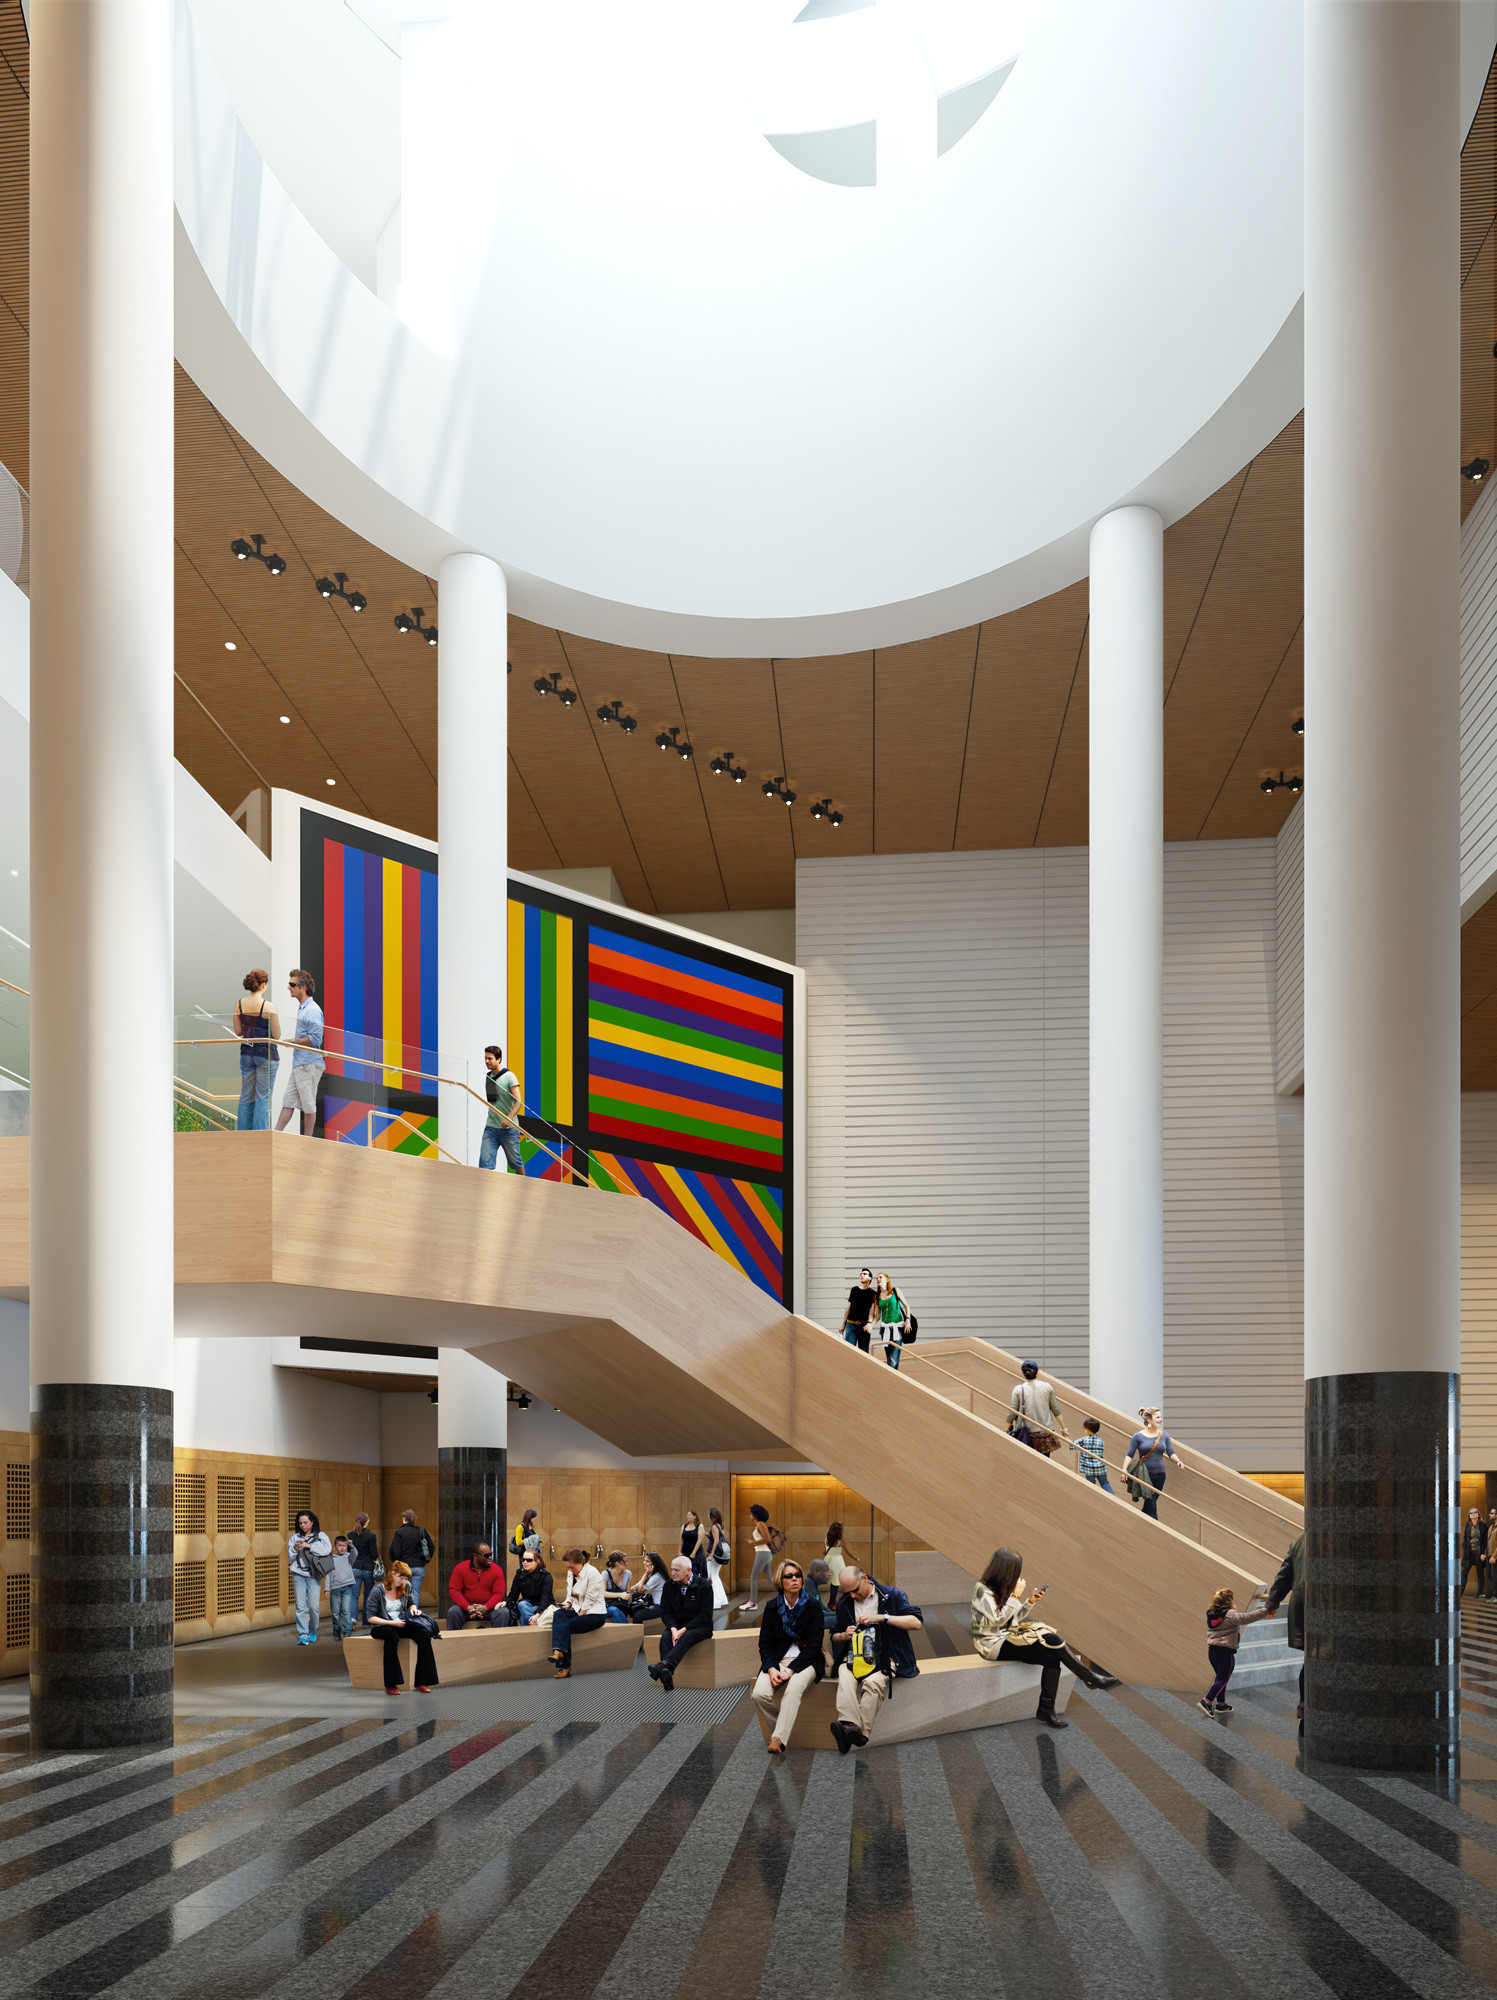 3D rendering by steelblue for SFMOMA